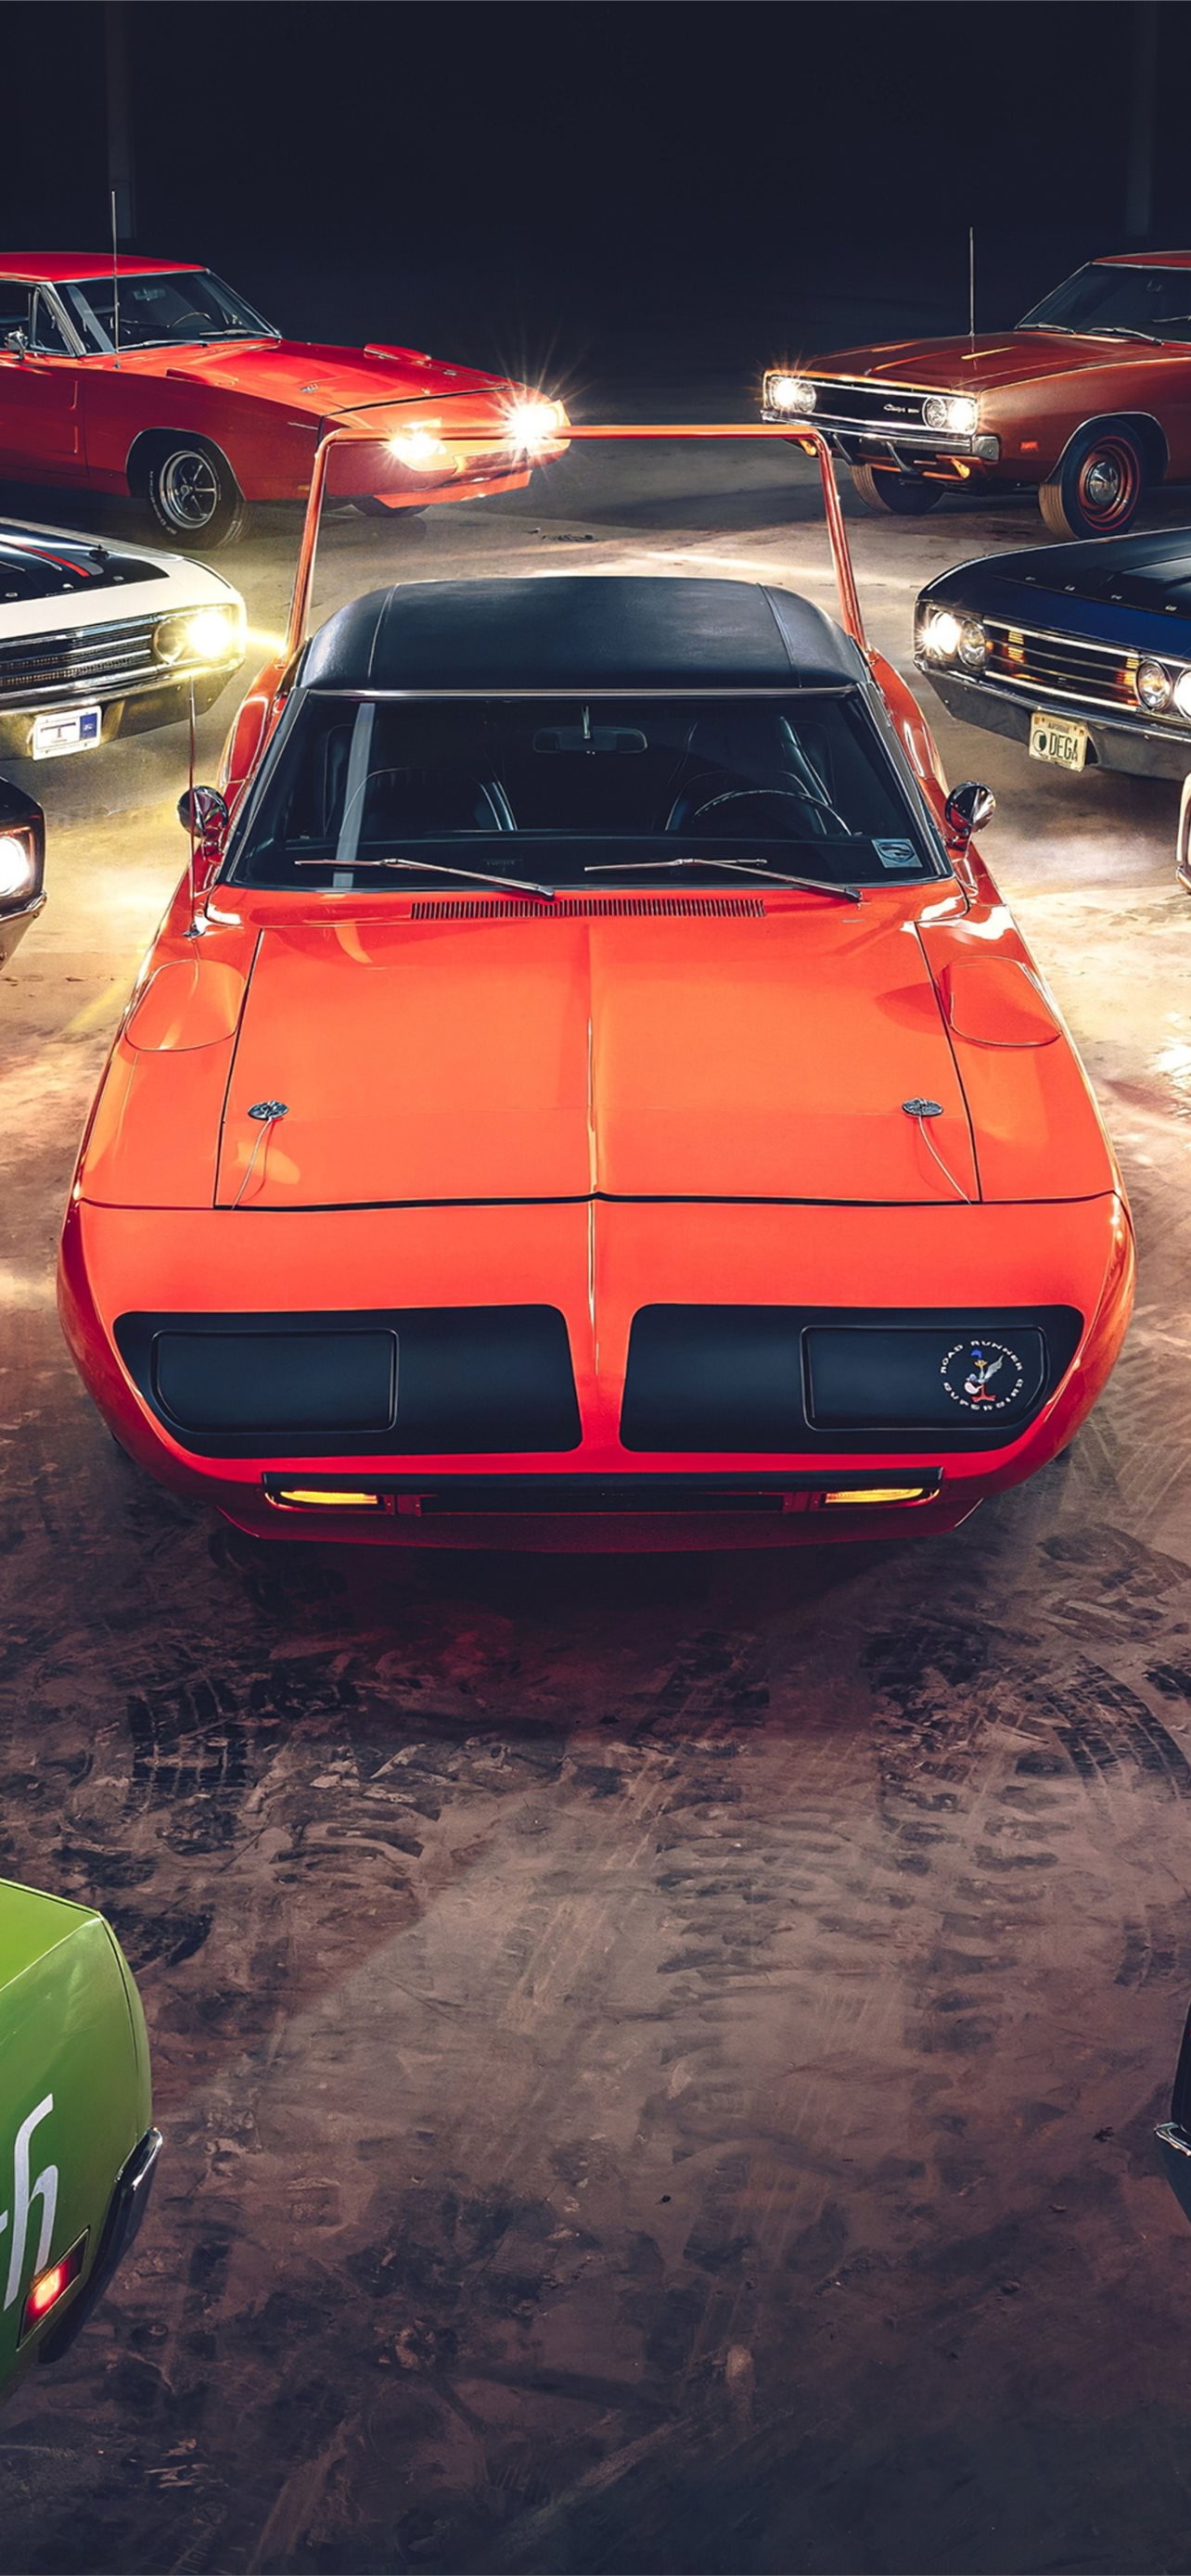 Dodge Charger, Iconic classic, iPhone wallpapers, Free download, 1290x2780 HD Handy